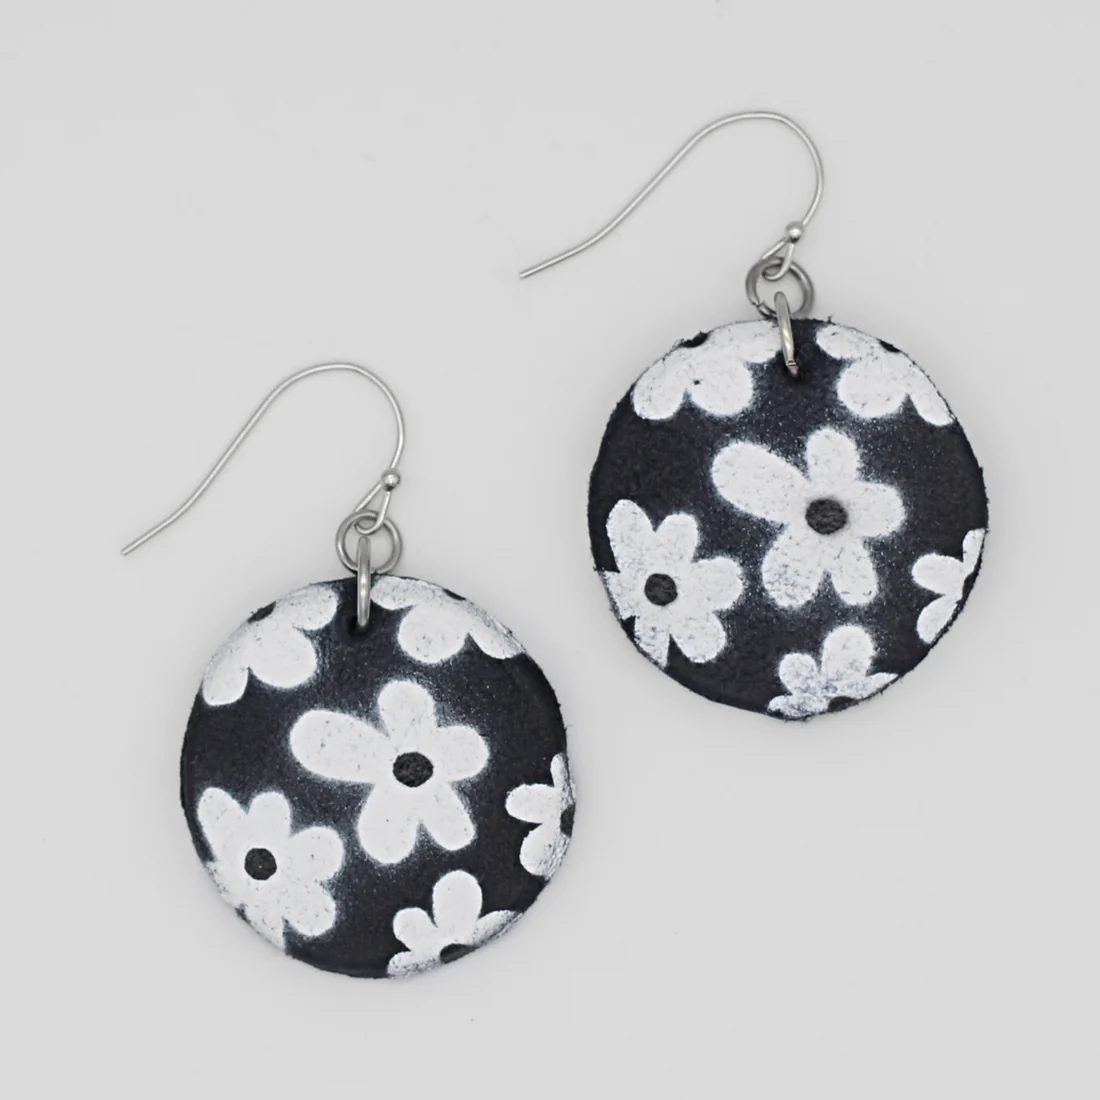 Daisy Black and White Earrings